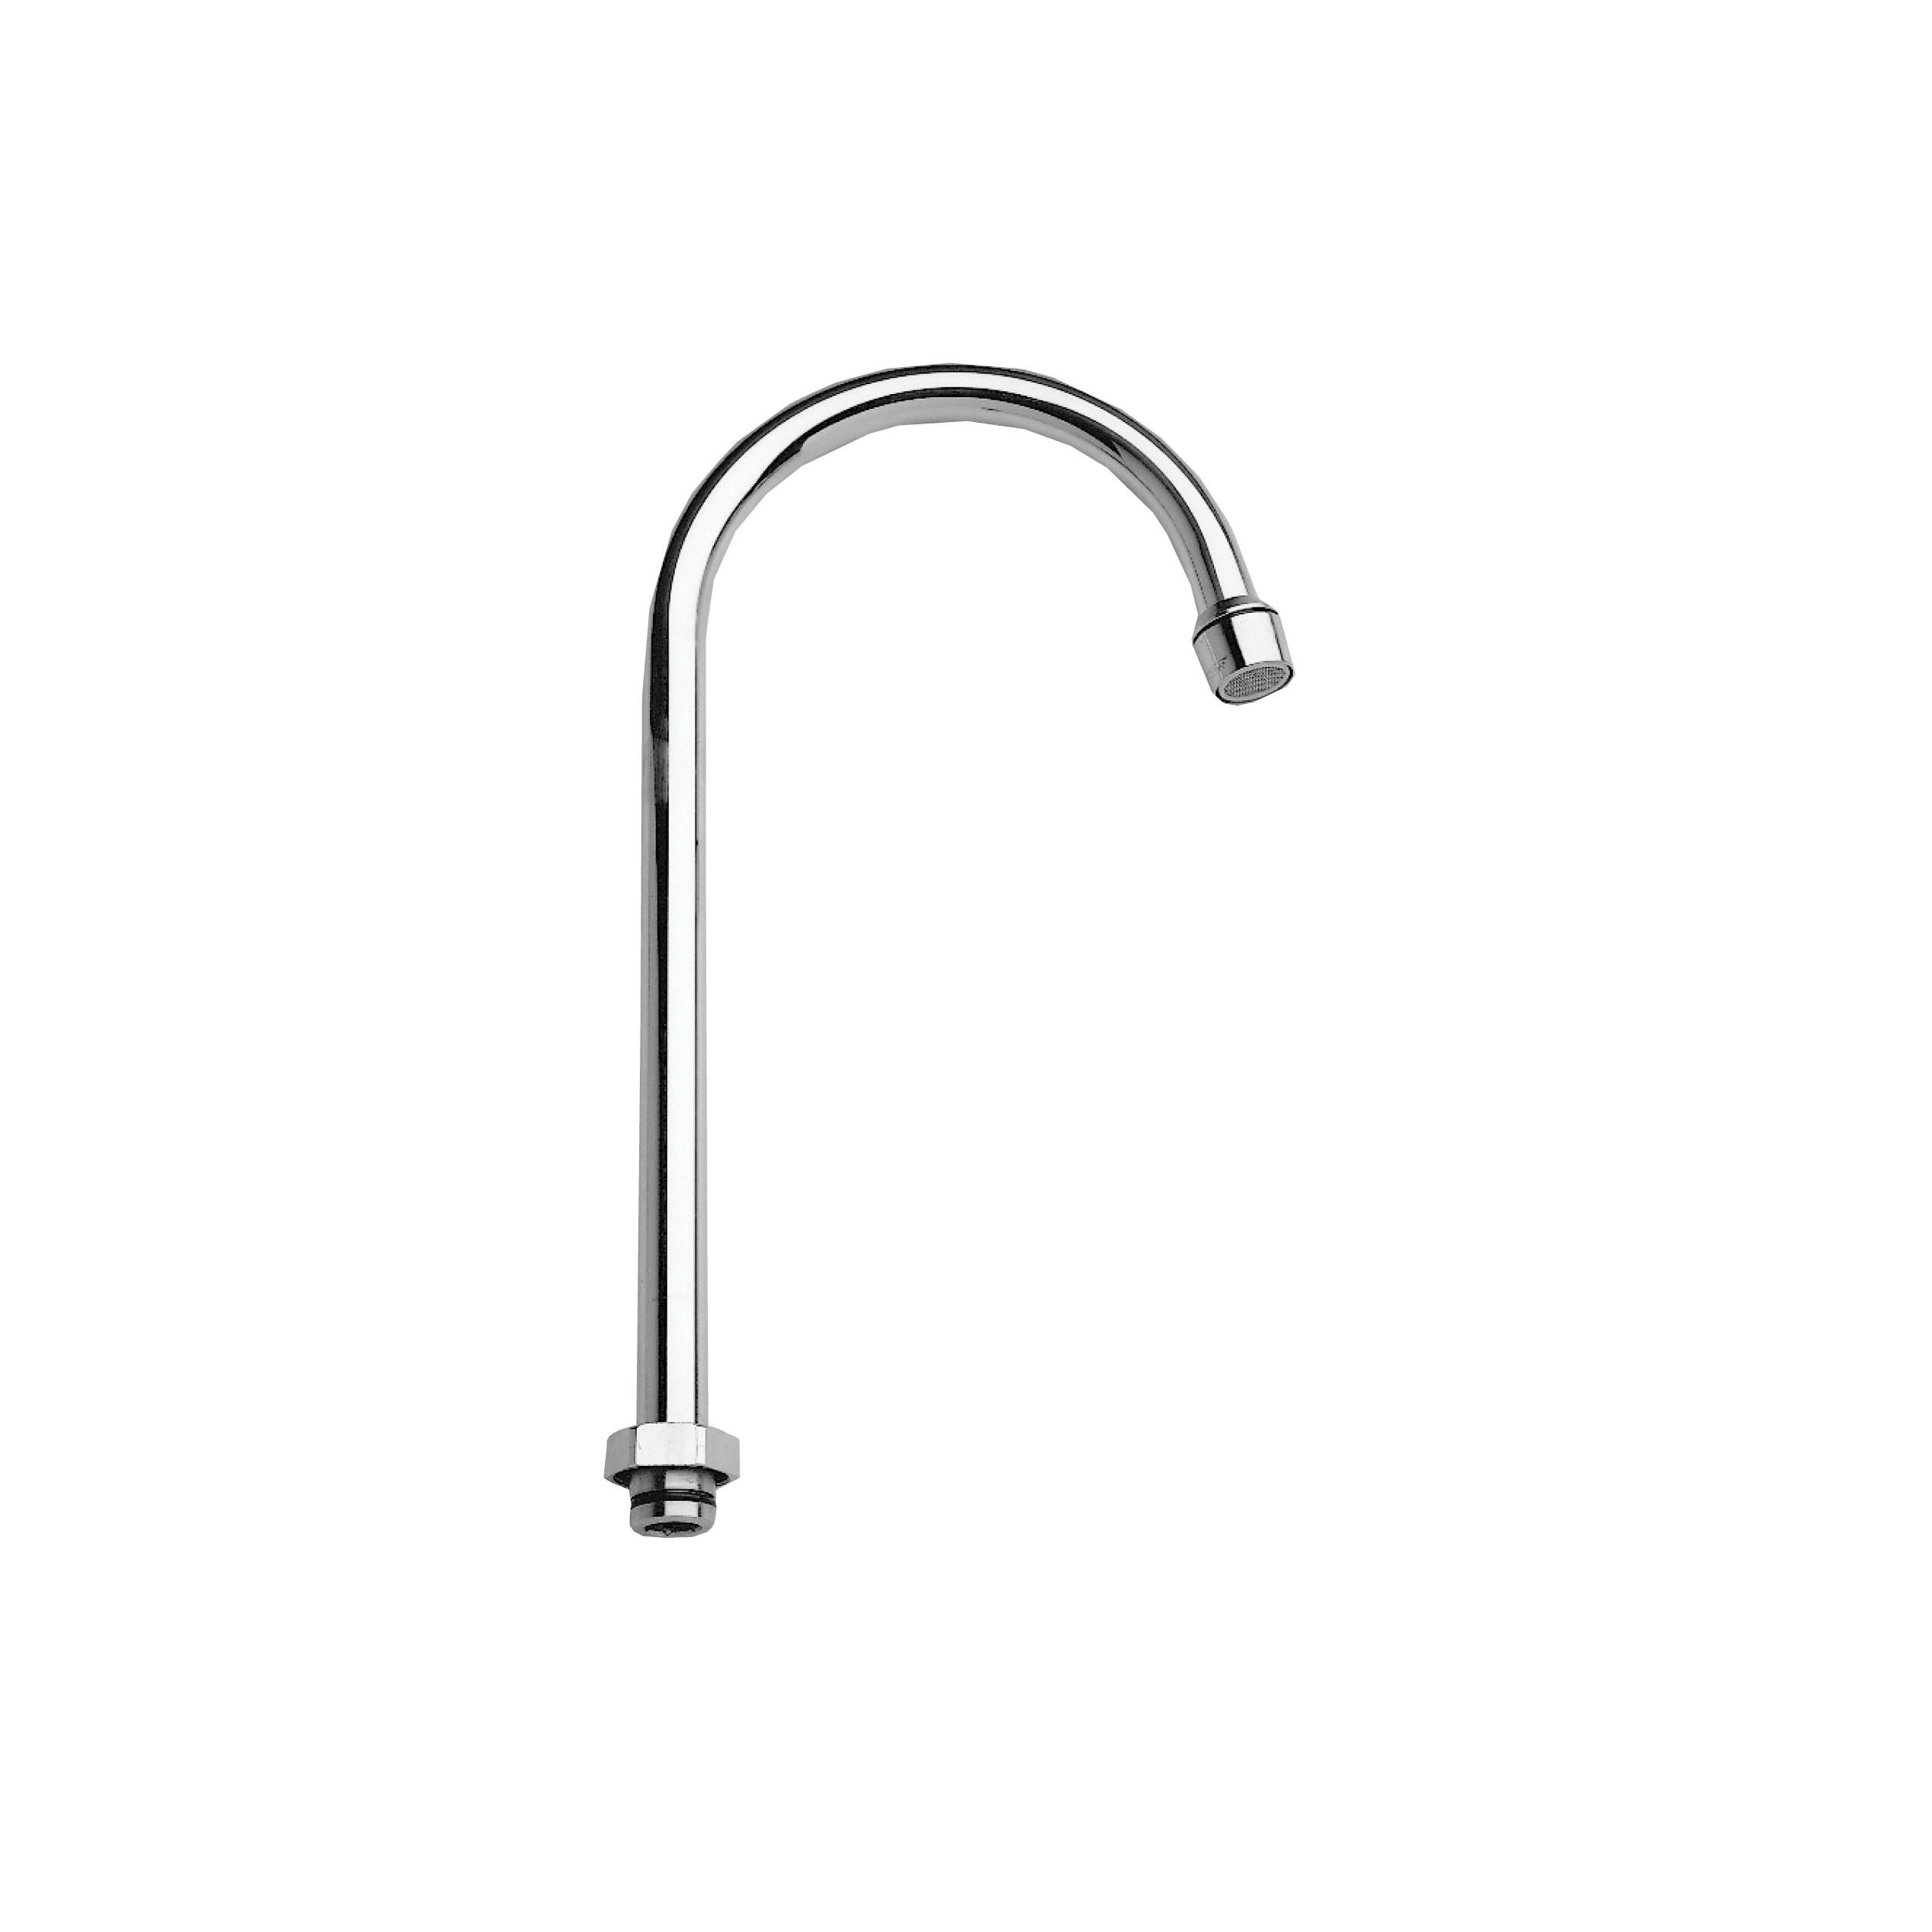 Fisher 16659 Swivel Bar Spout, 1/2 in, For Use With Gooseneck Faucets, 1.5 gpm, Brass